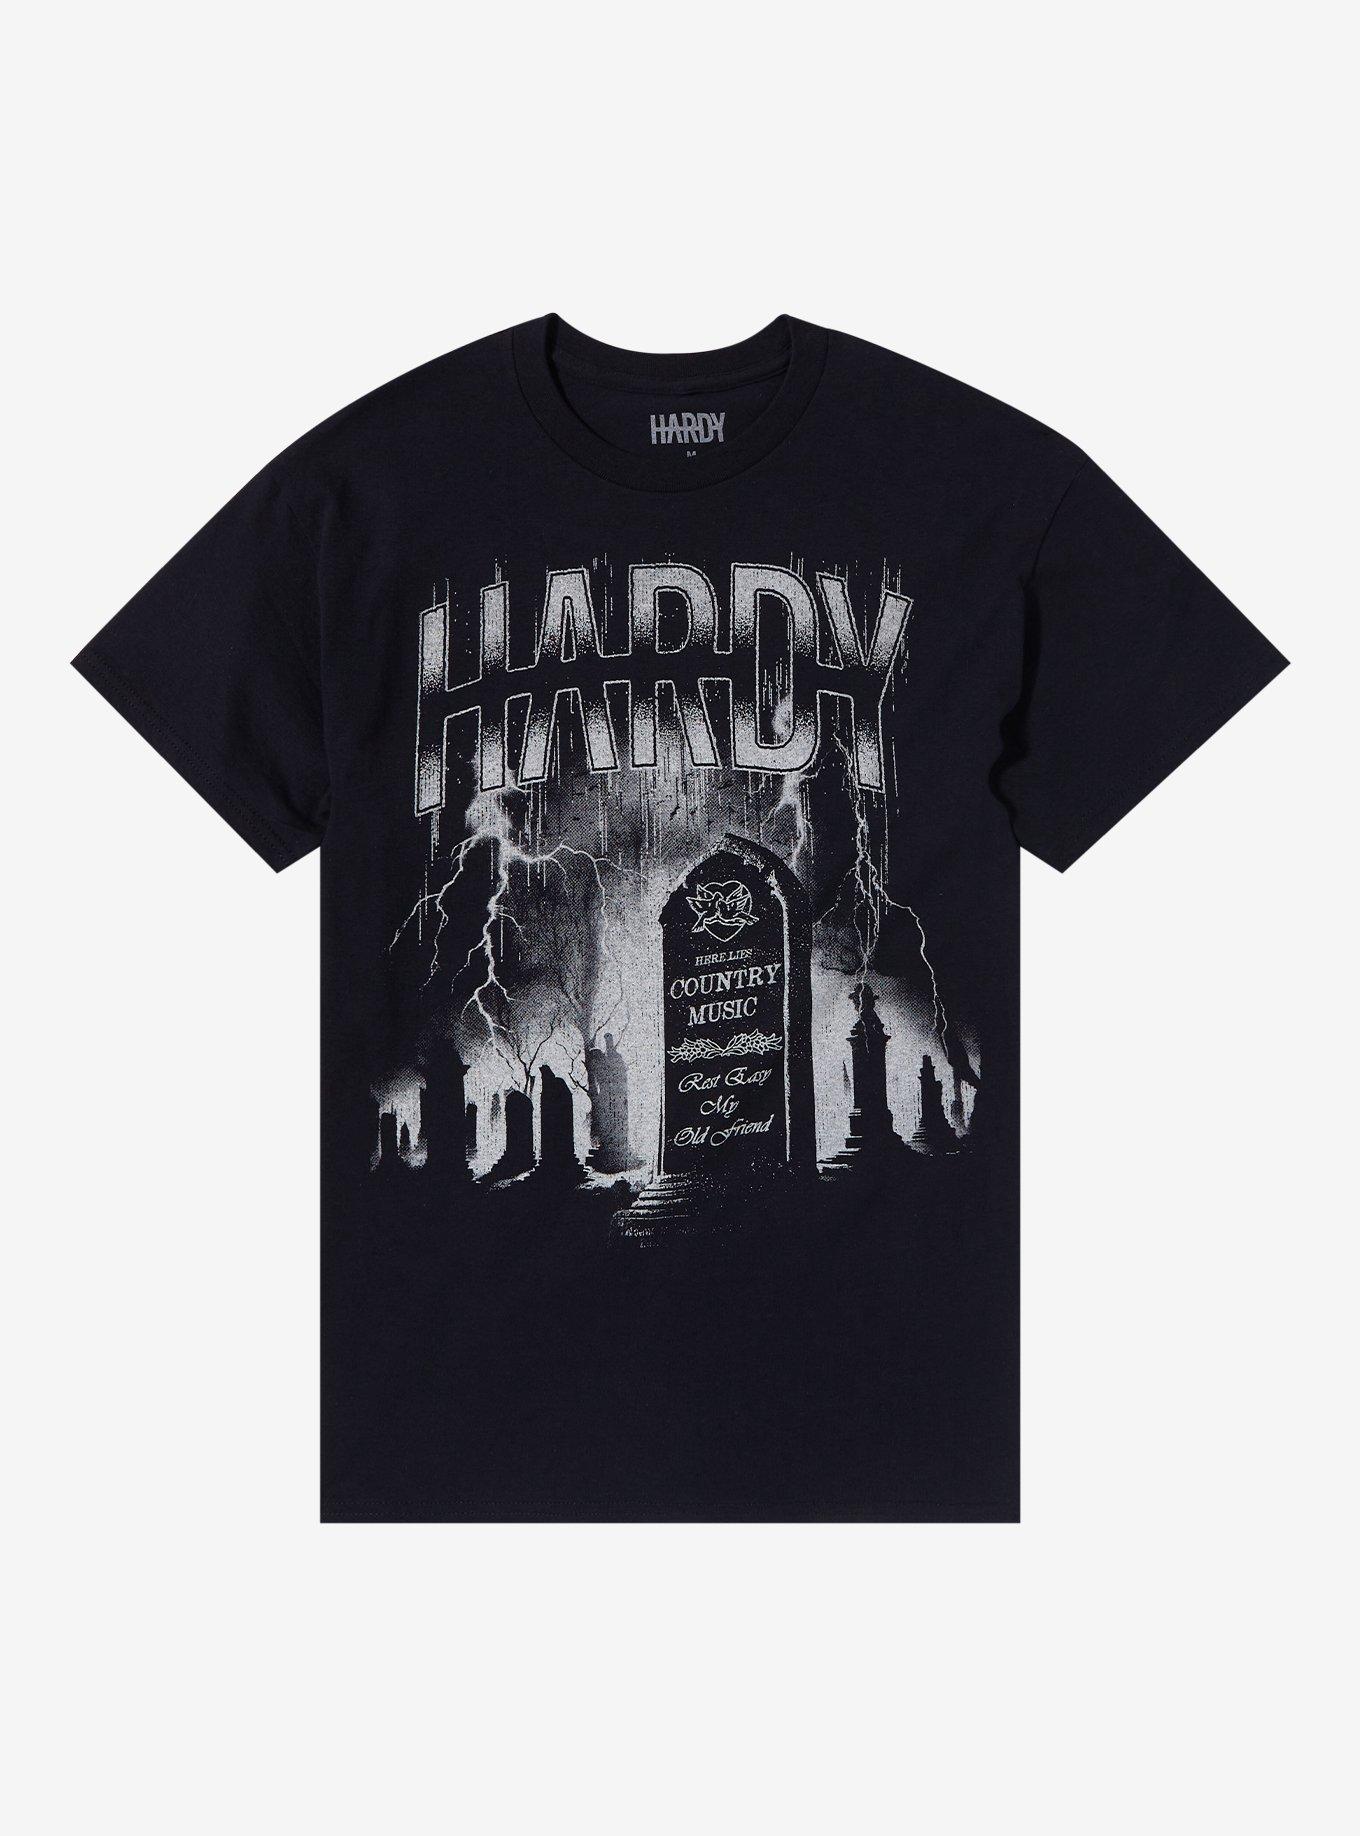 Hardy Here Lies Country Music T-Shirt, BLACK, hi-res